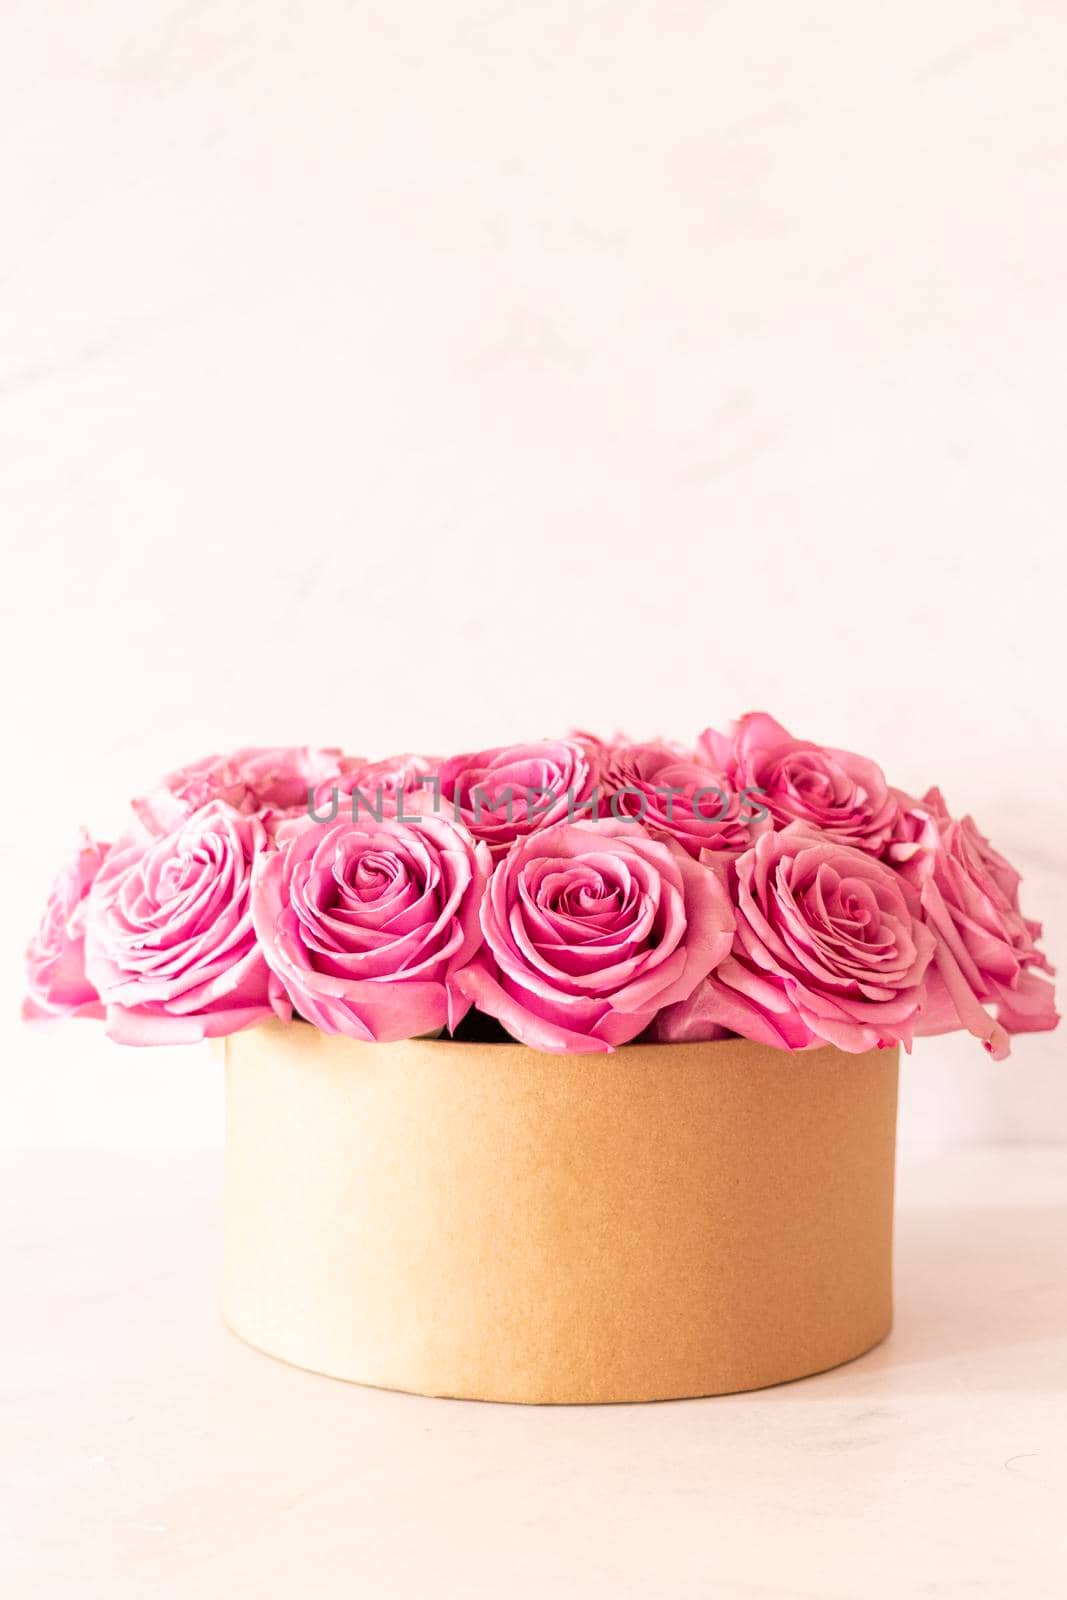 Floral arrangement composed of pink roses for spring by eagg13